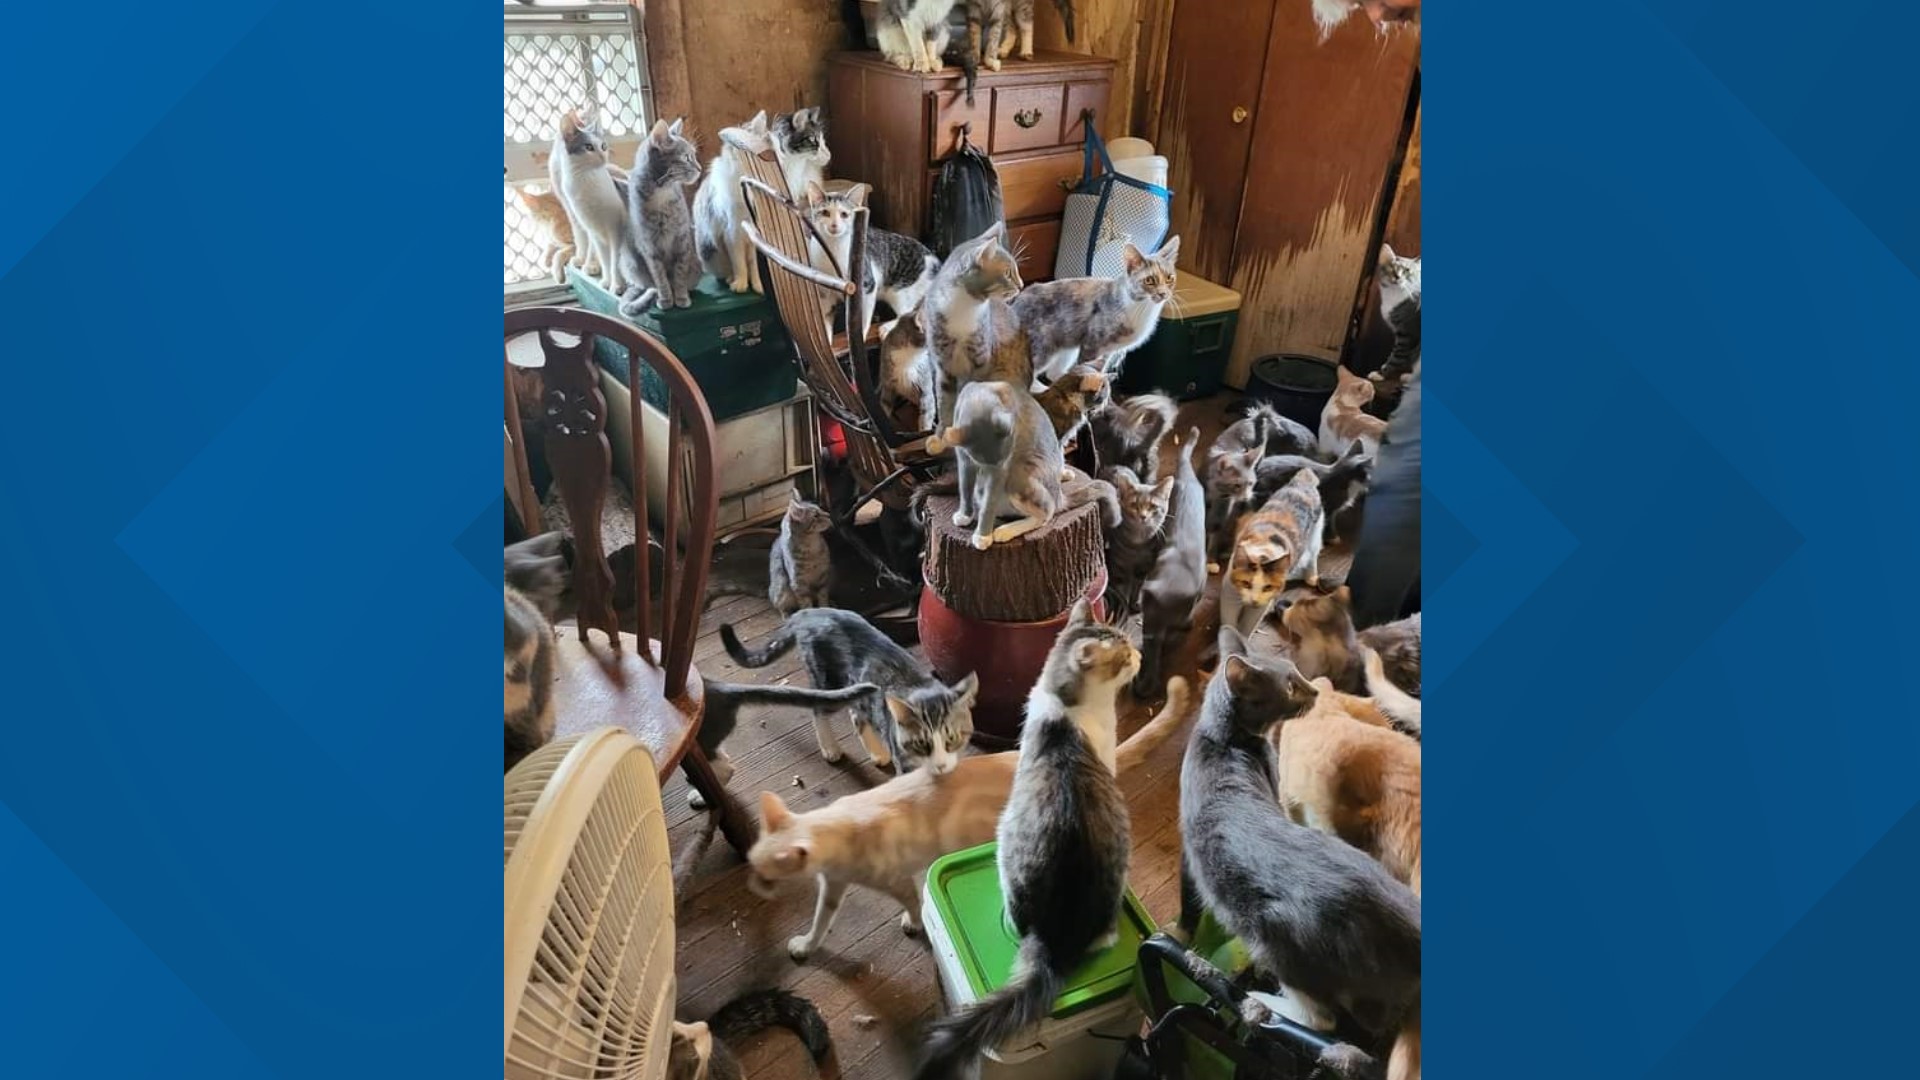 Feline Solutions says there was barely any space for the cats to roam around the room.